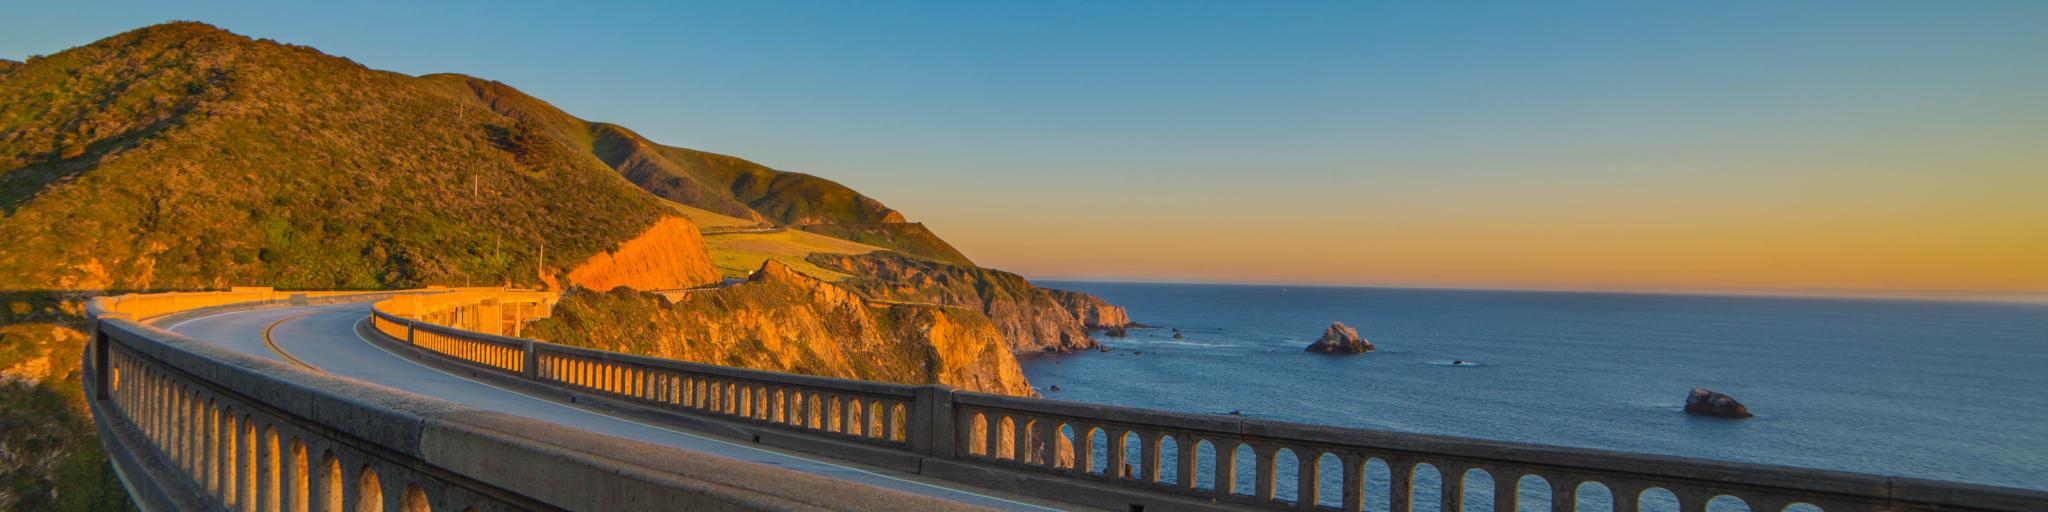 A view from the road running over the Bixby Creek Bridge on the Pacific Coast Highway in California near Big Sur at sunset 